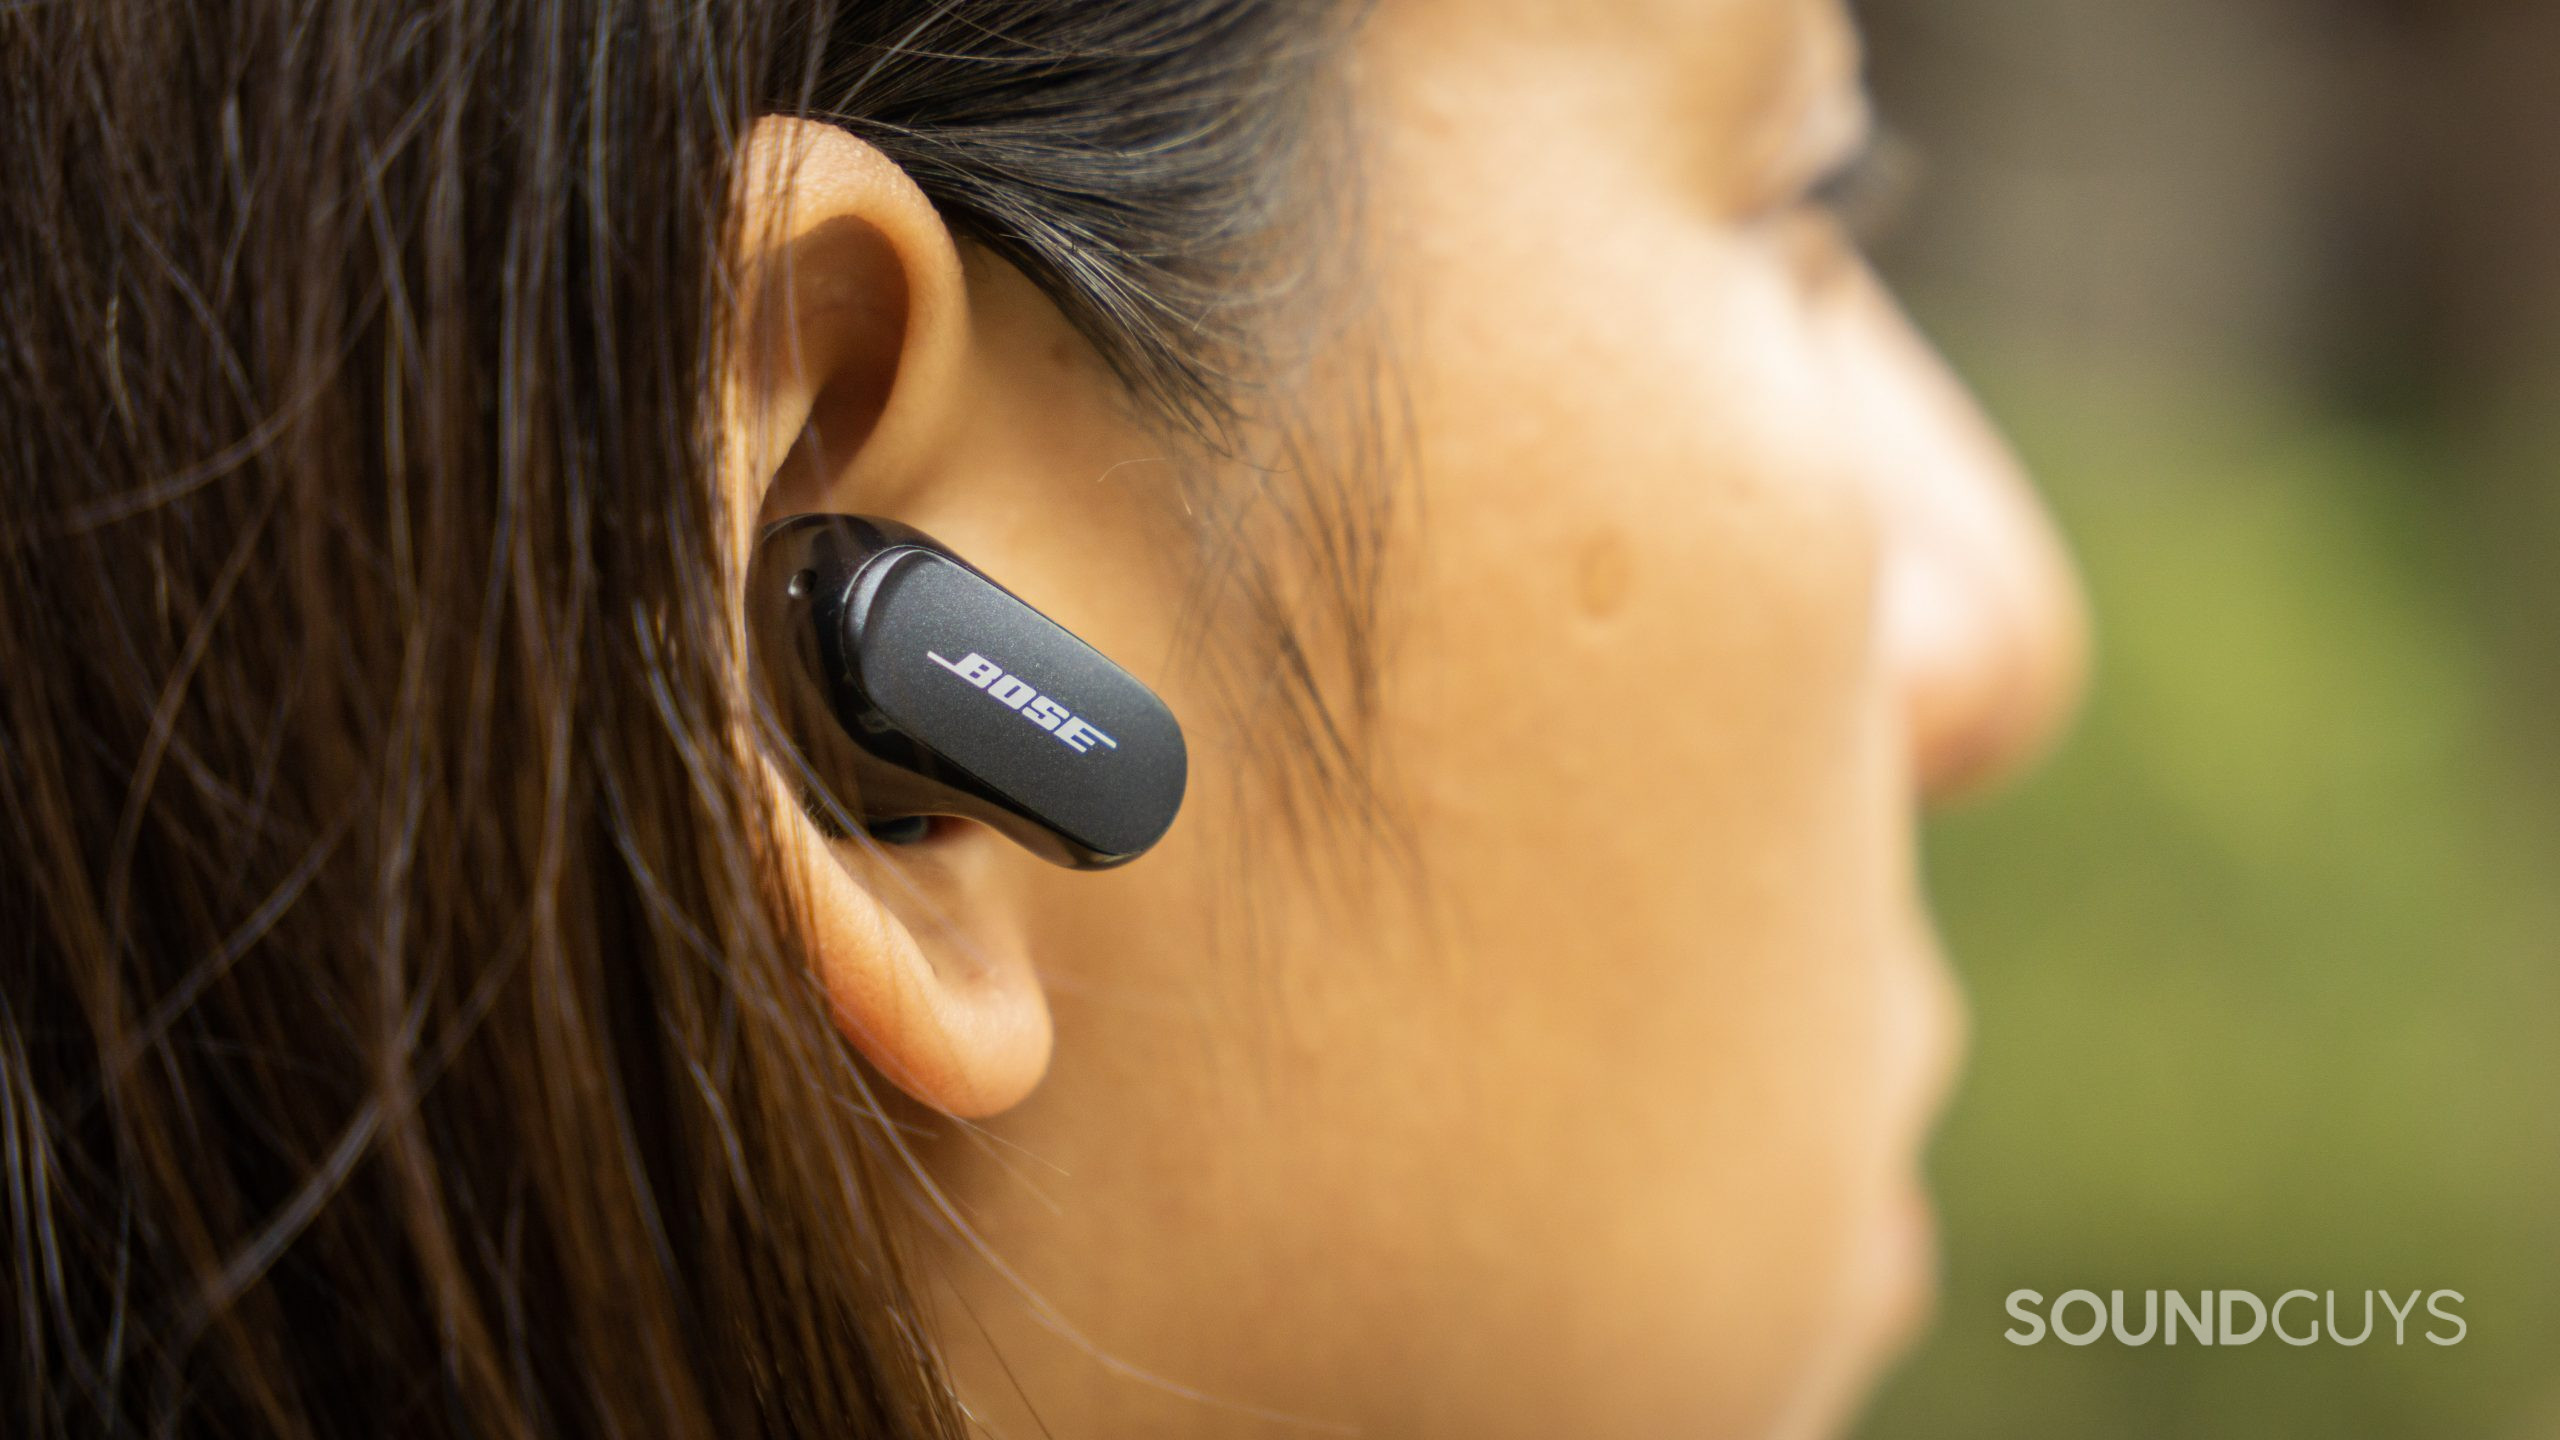 The Bose QuietComfort Earbuds II calculate how to adjust its sound to tailor it to your ear.